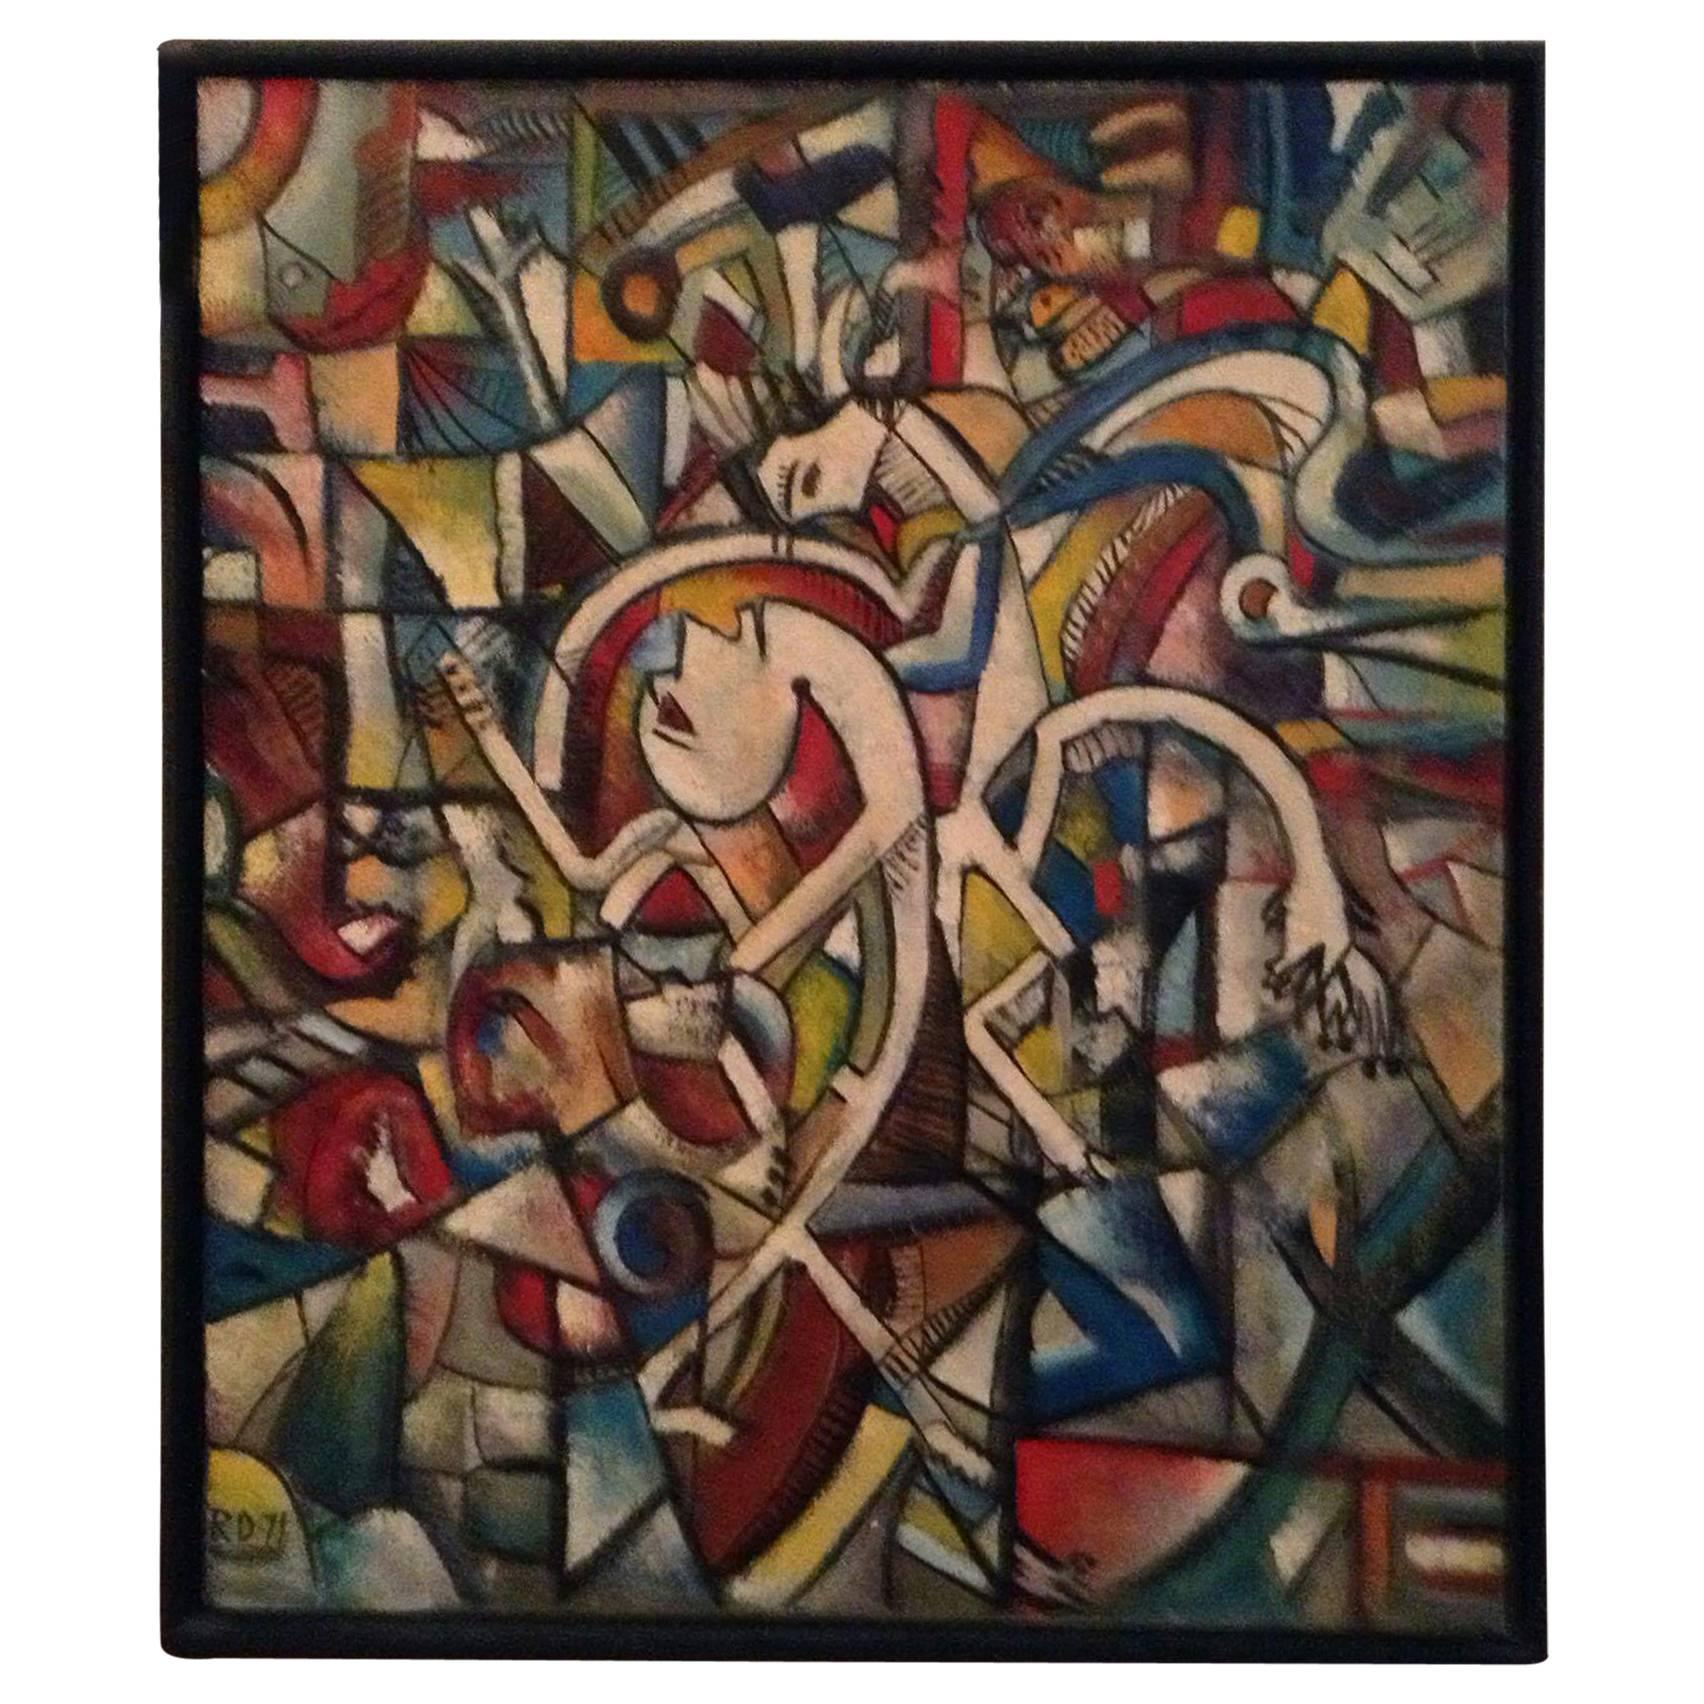 Cubist Surrealist Oil on Canvas Painting, Signed and Dated, RD 1971